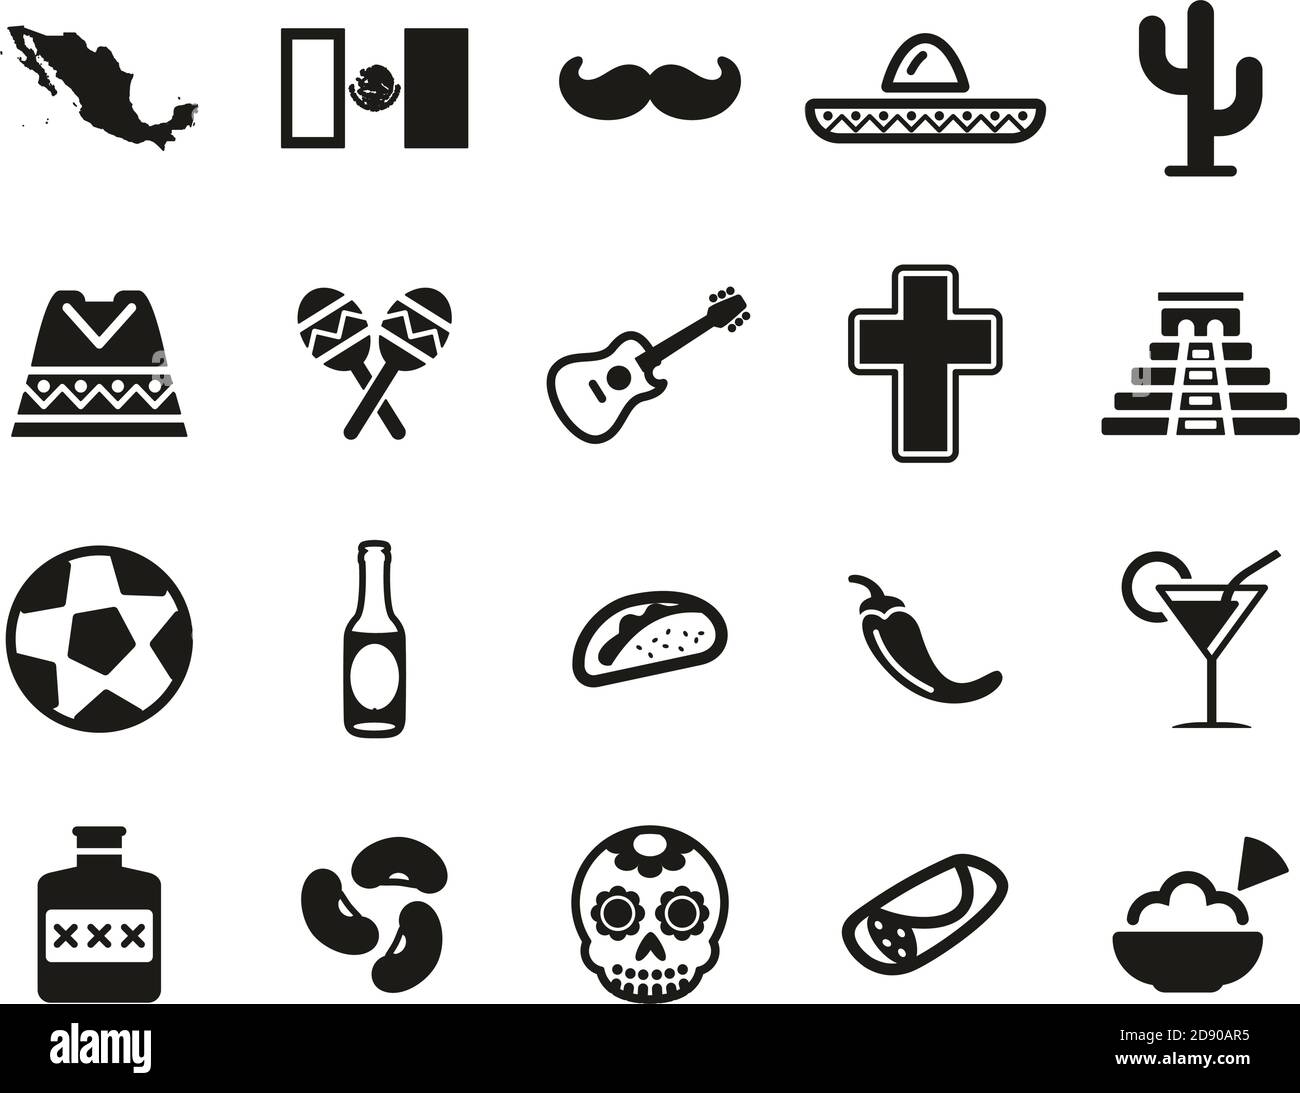 Mexico Country & Culture Icons Black & White Set Big Stock Vector